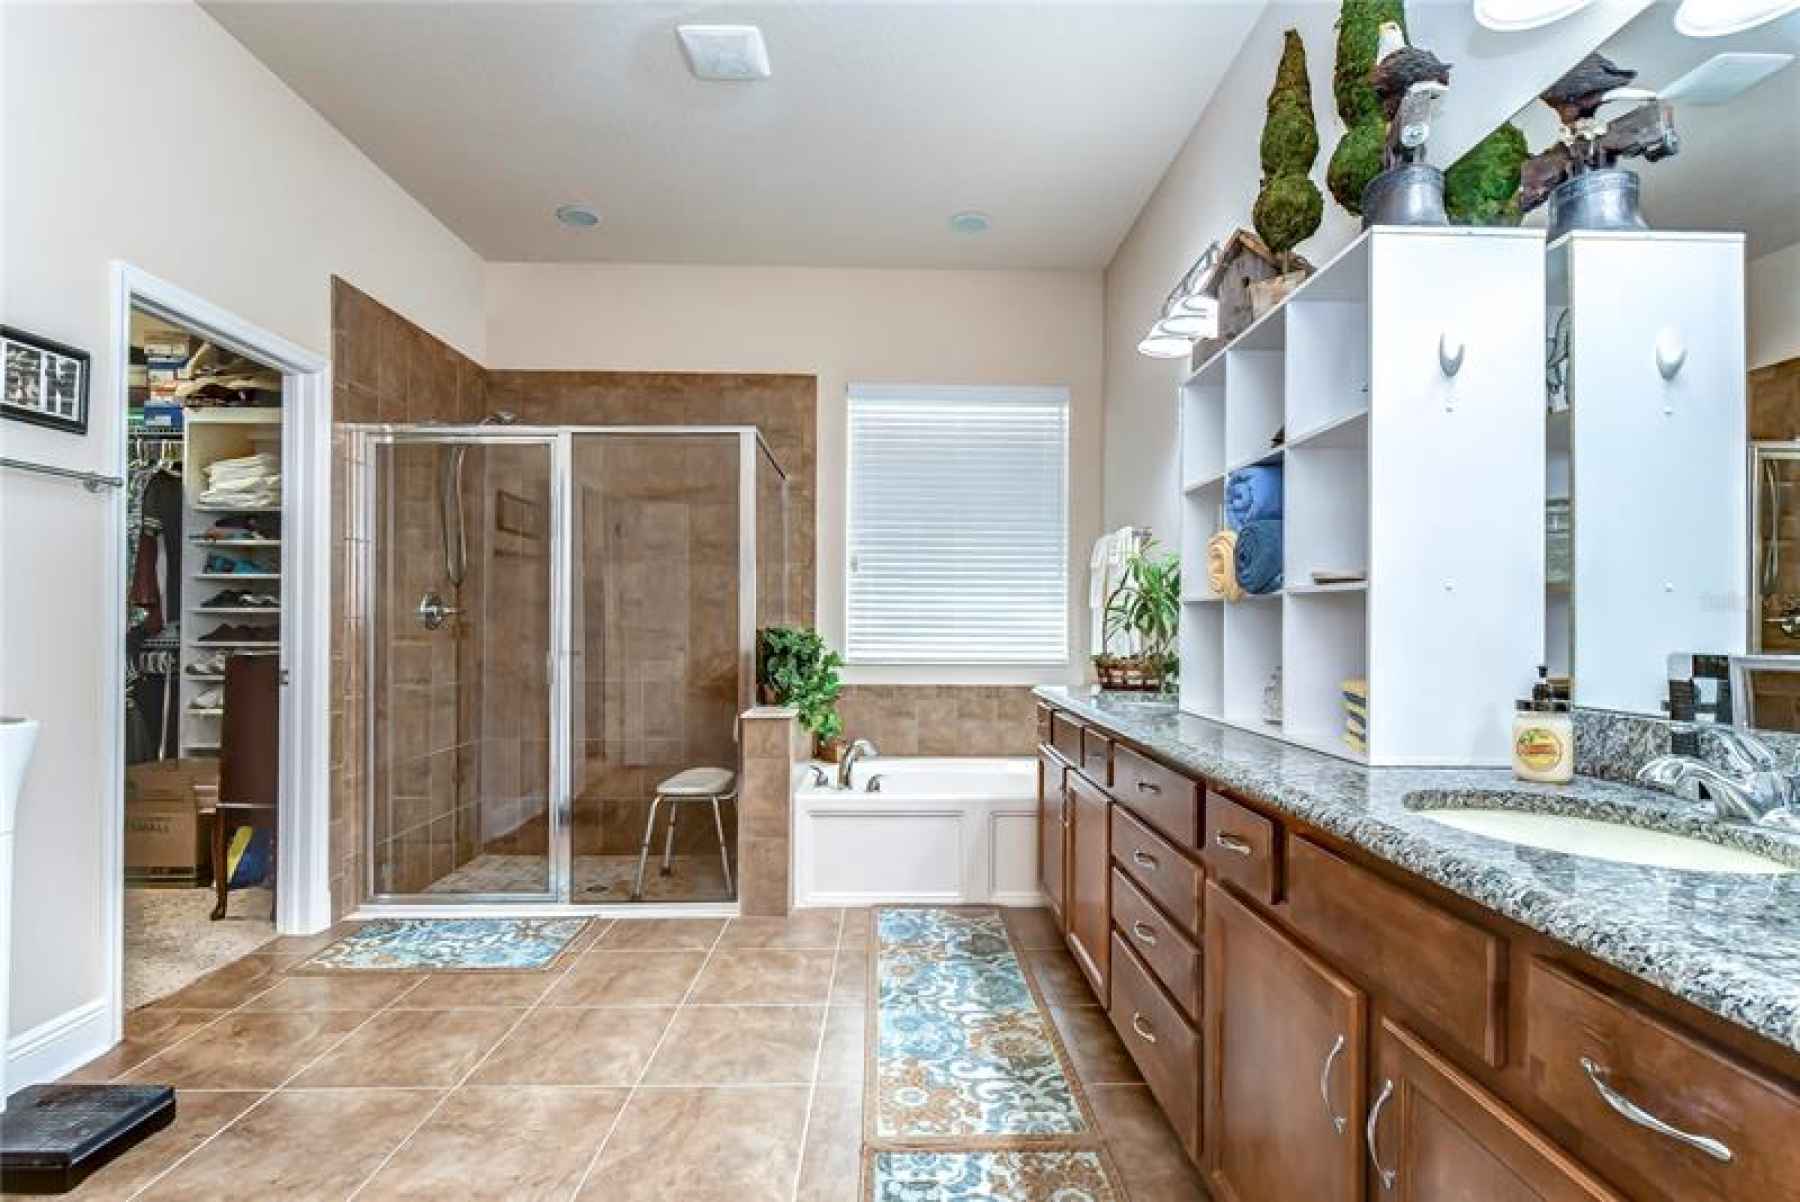 Featuring its own separate walk-in shower!